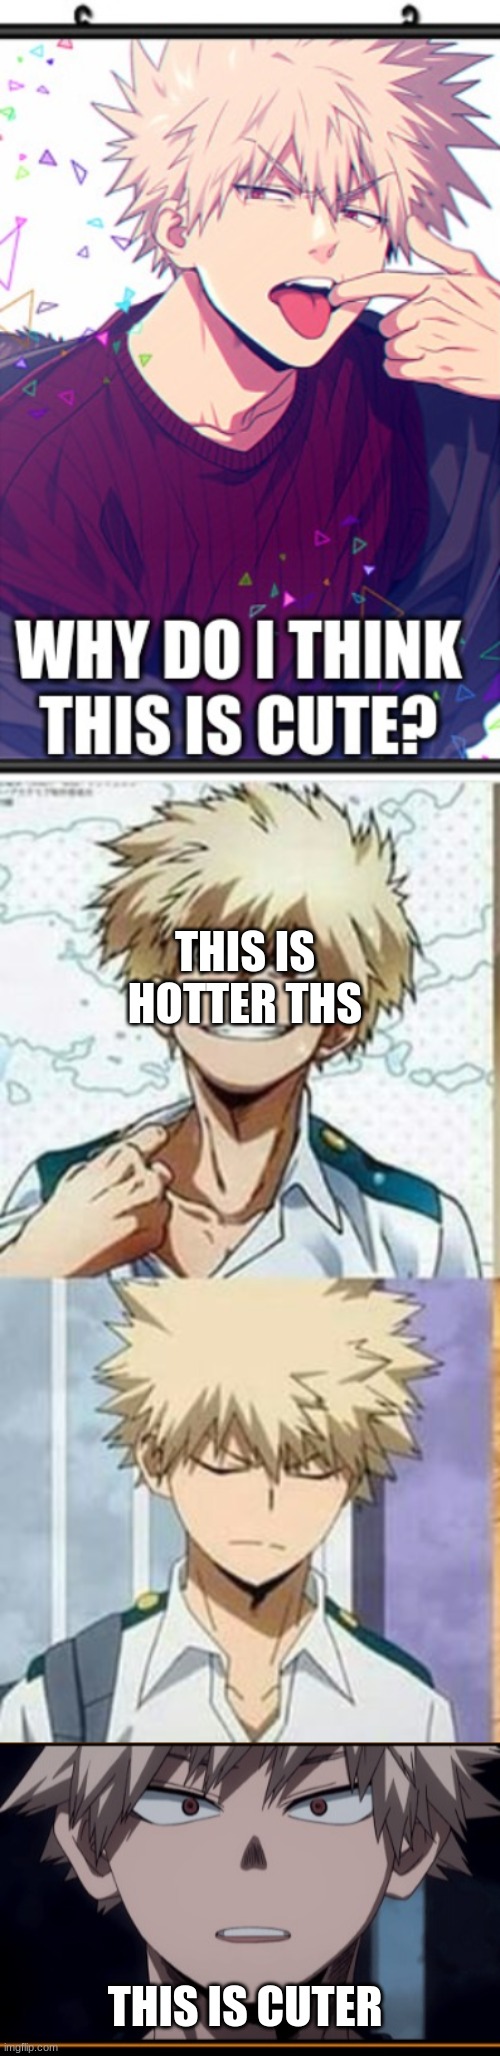 THIS IS HOTTER THS; THIS IS CUTER | made w/ Imgflip meme maker